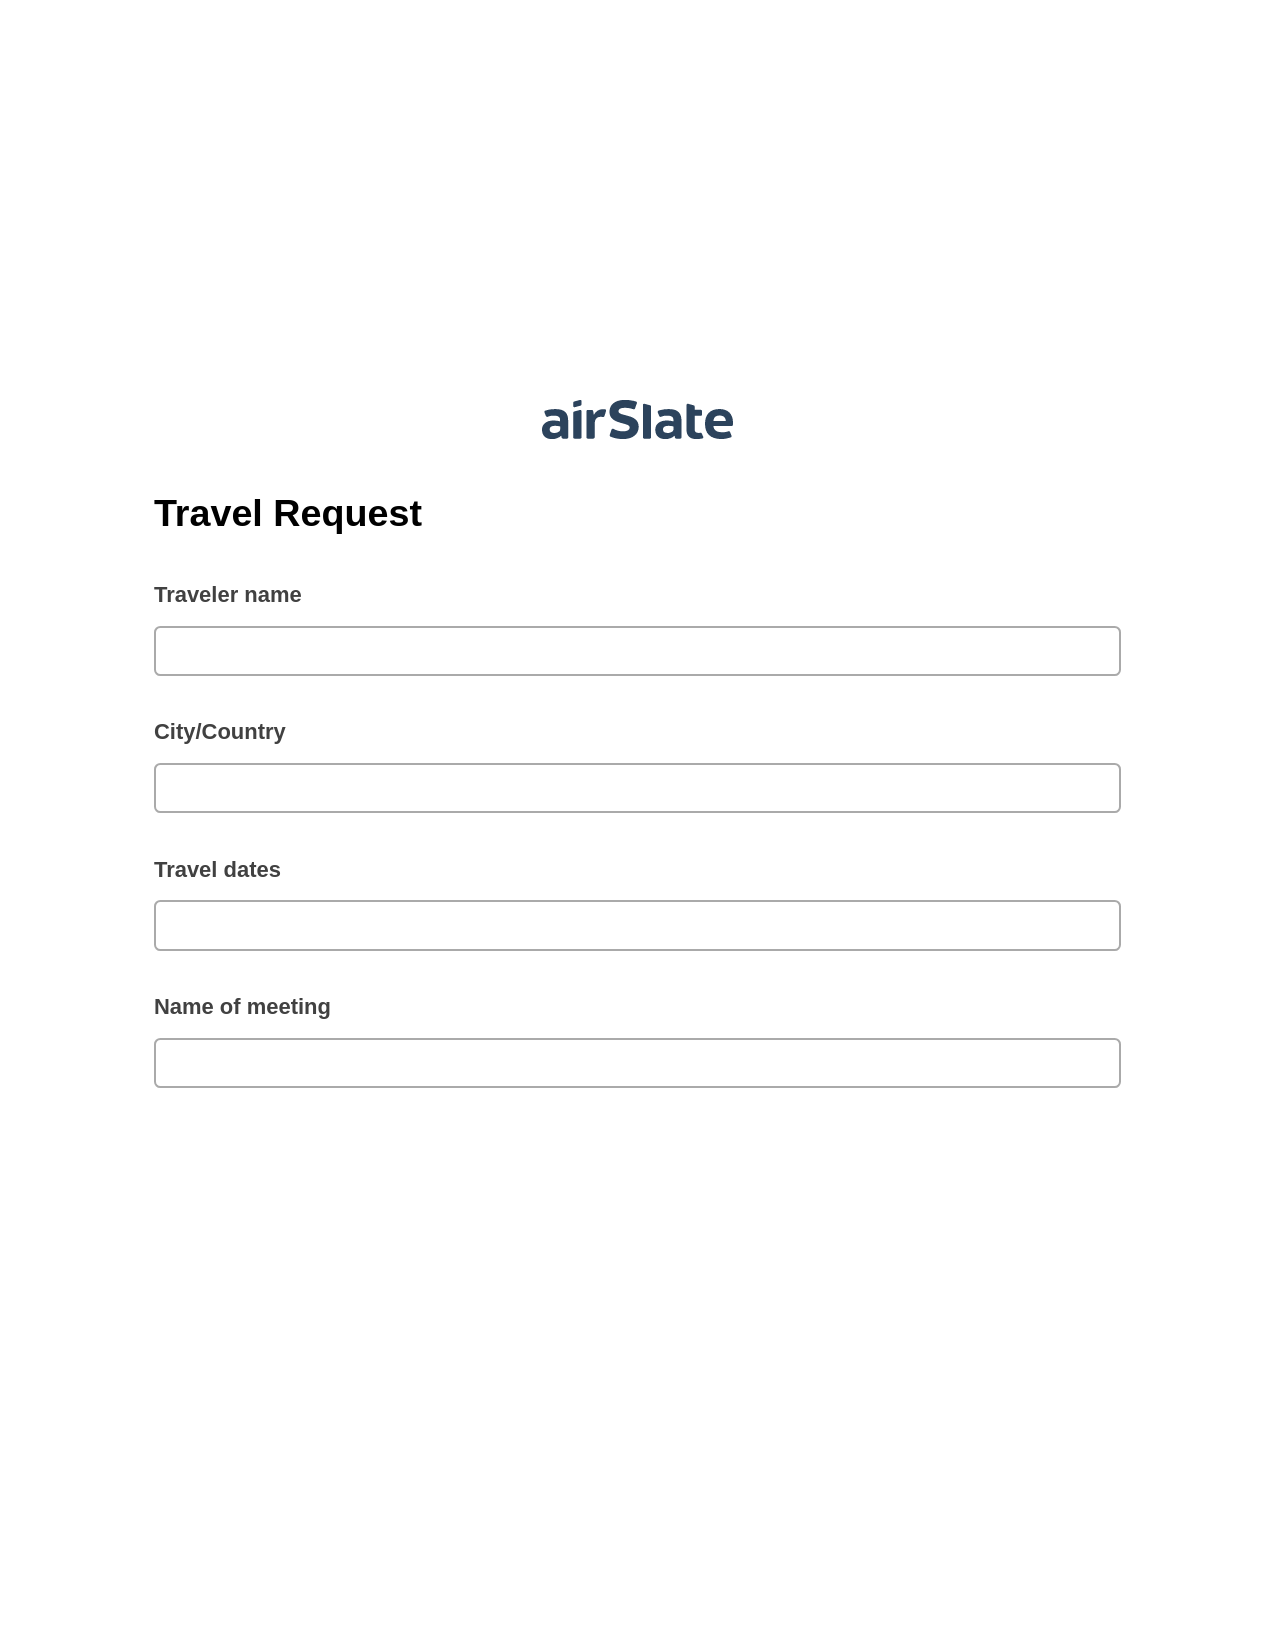 Travel Request Pre-fill from Salesforce Record Bot, Create NetSuite Records Bot, Export to Excel 365 Bot